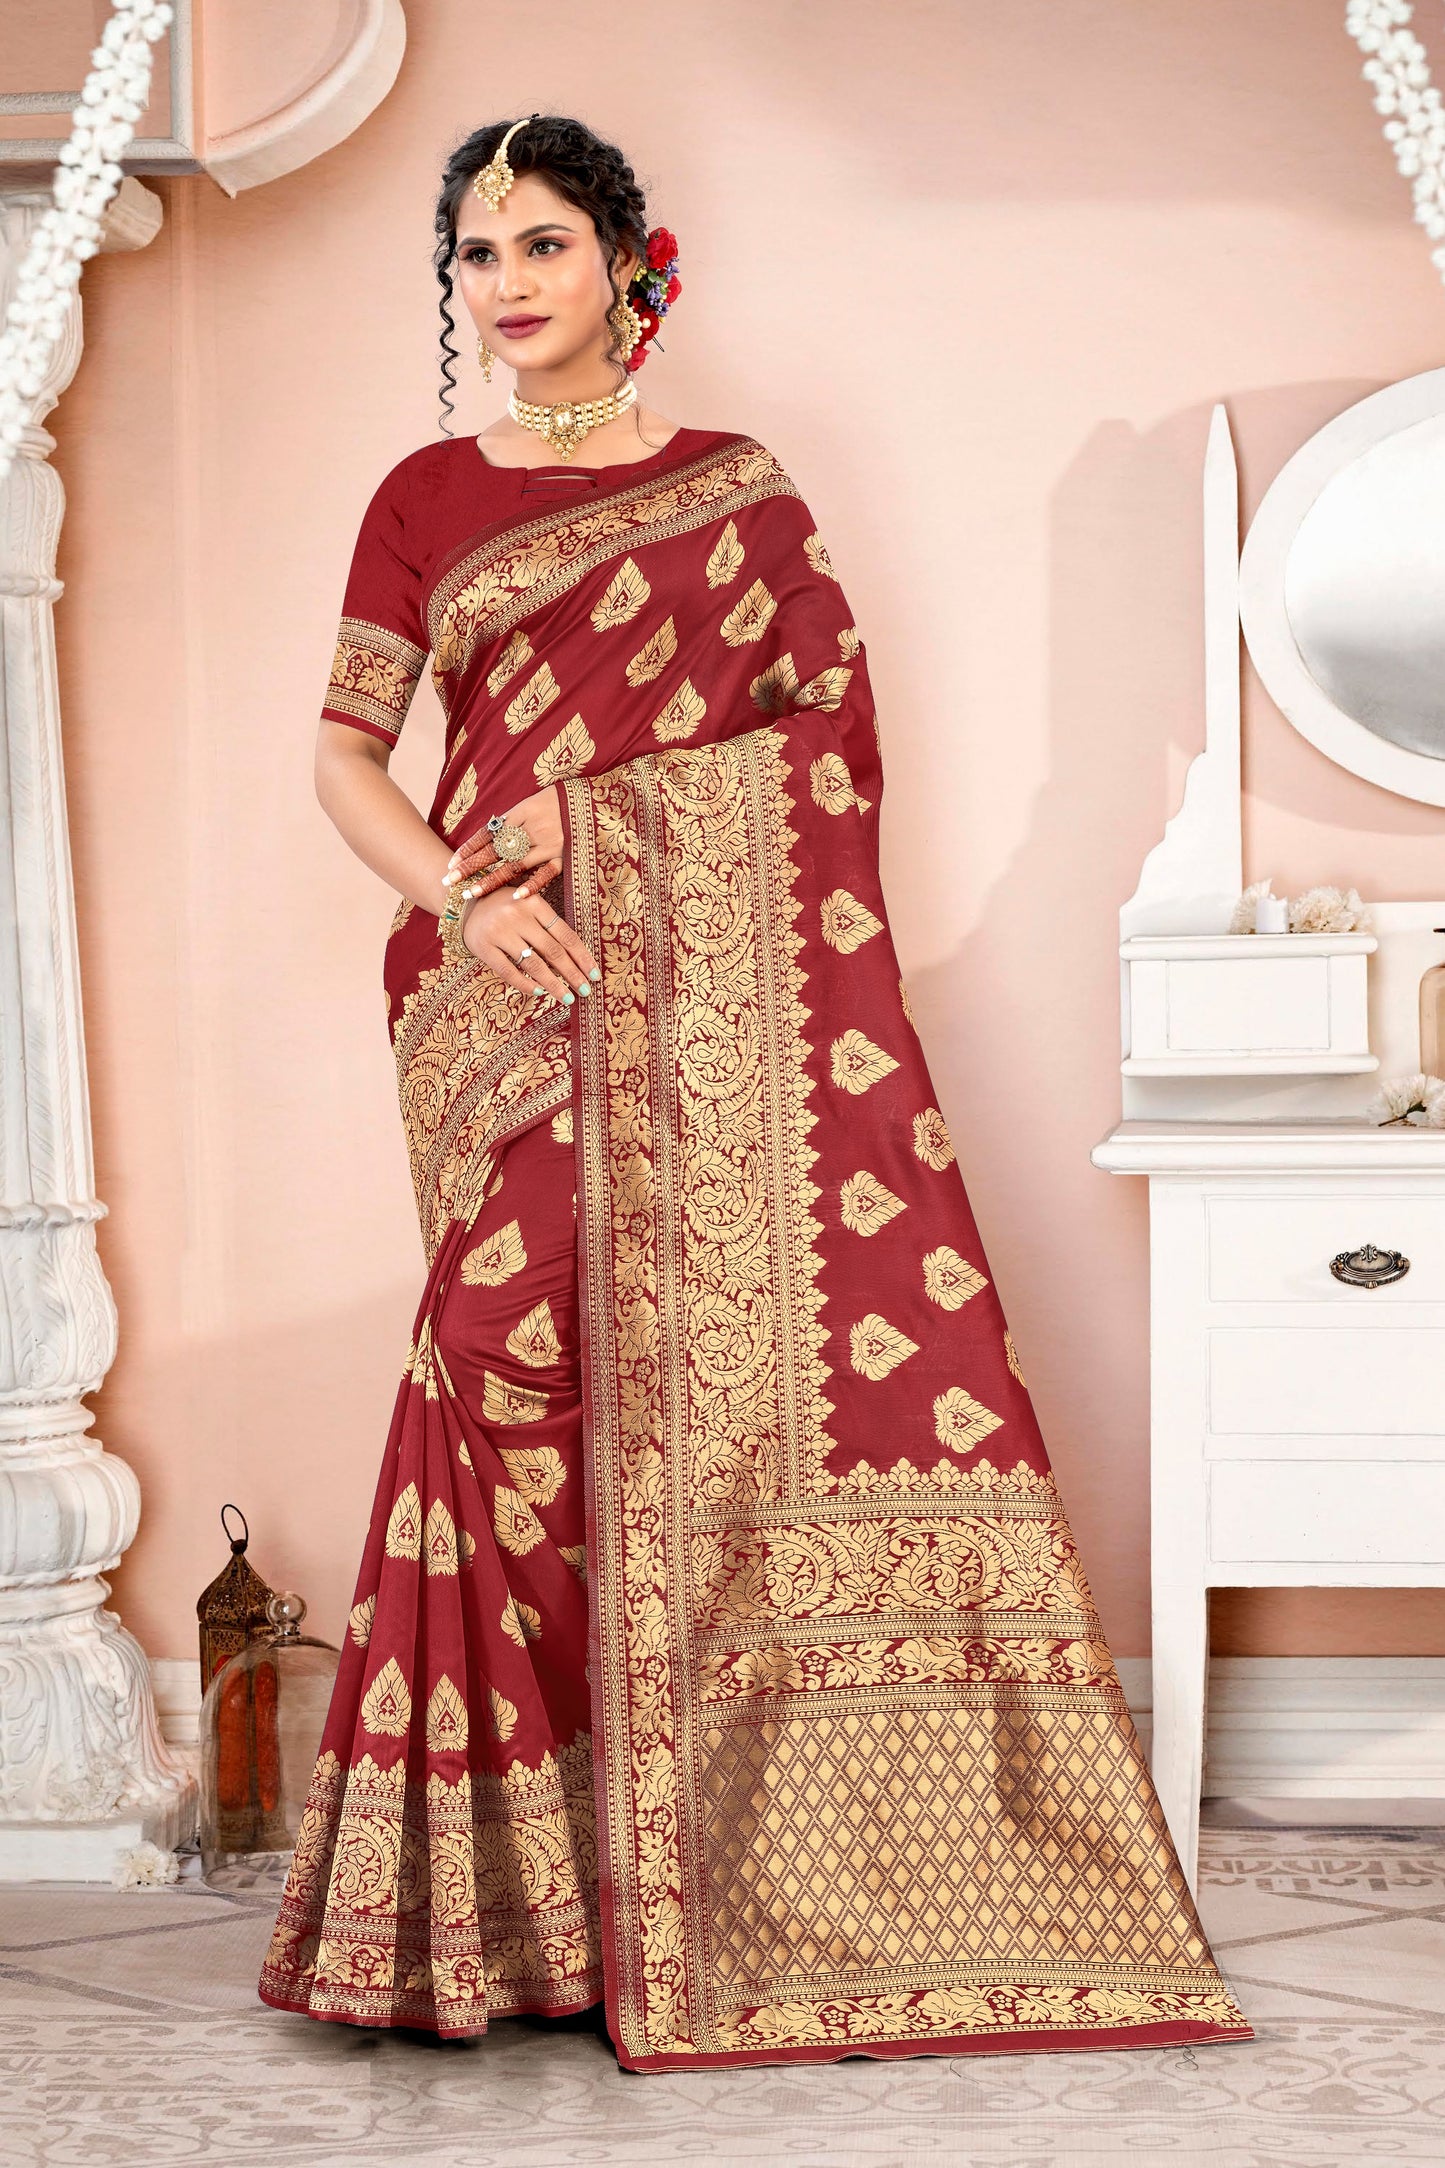 GORGEOUS PURE WEAVING BANARSI SILK SAREE IN MAROON FOR ALL FESTIVALS